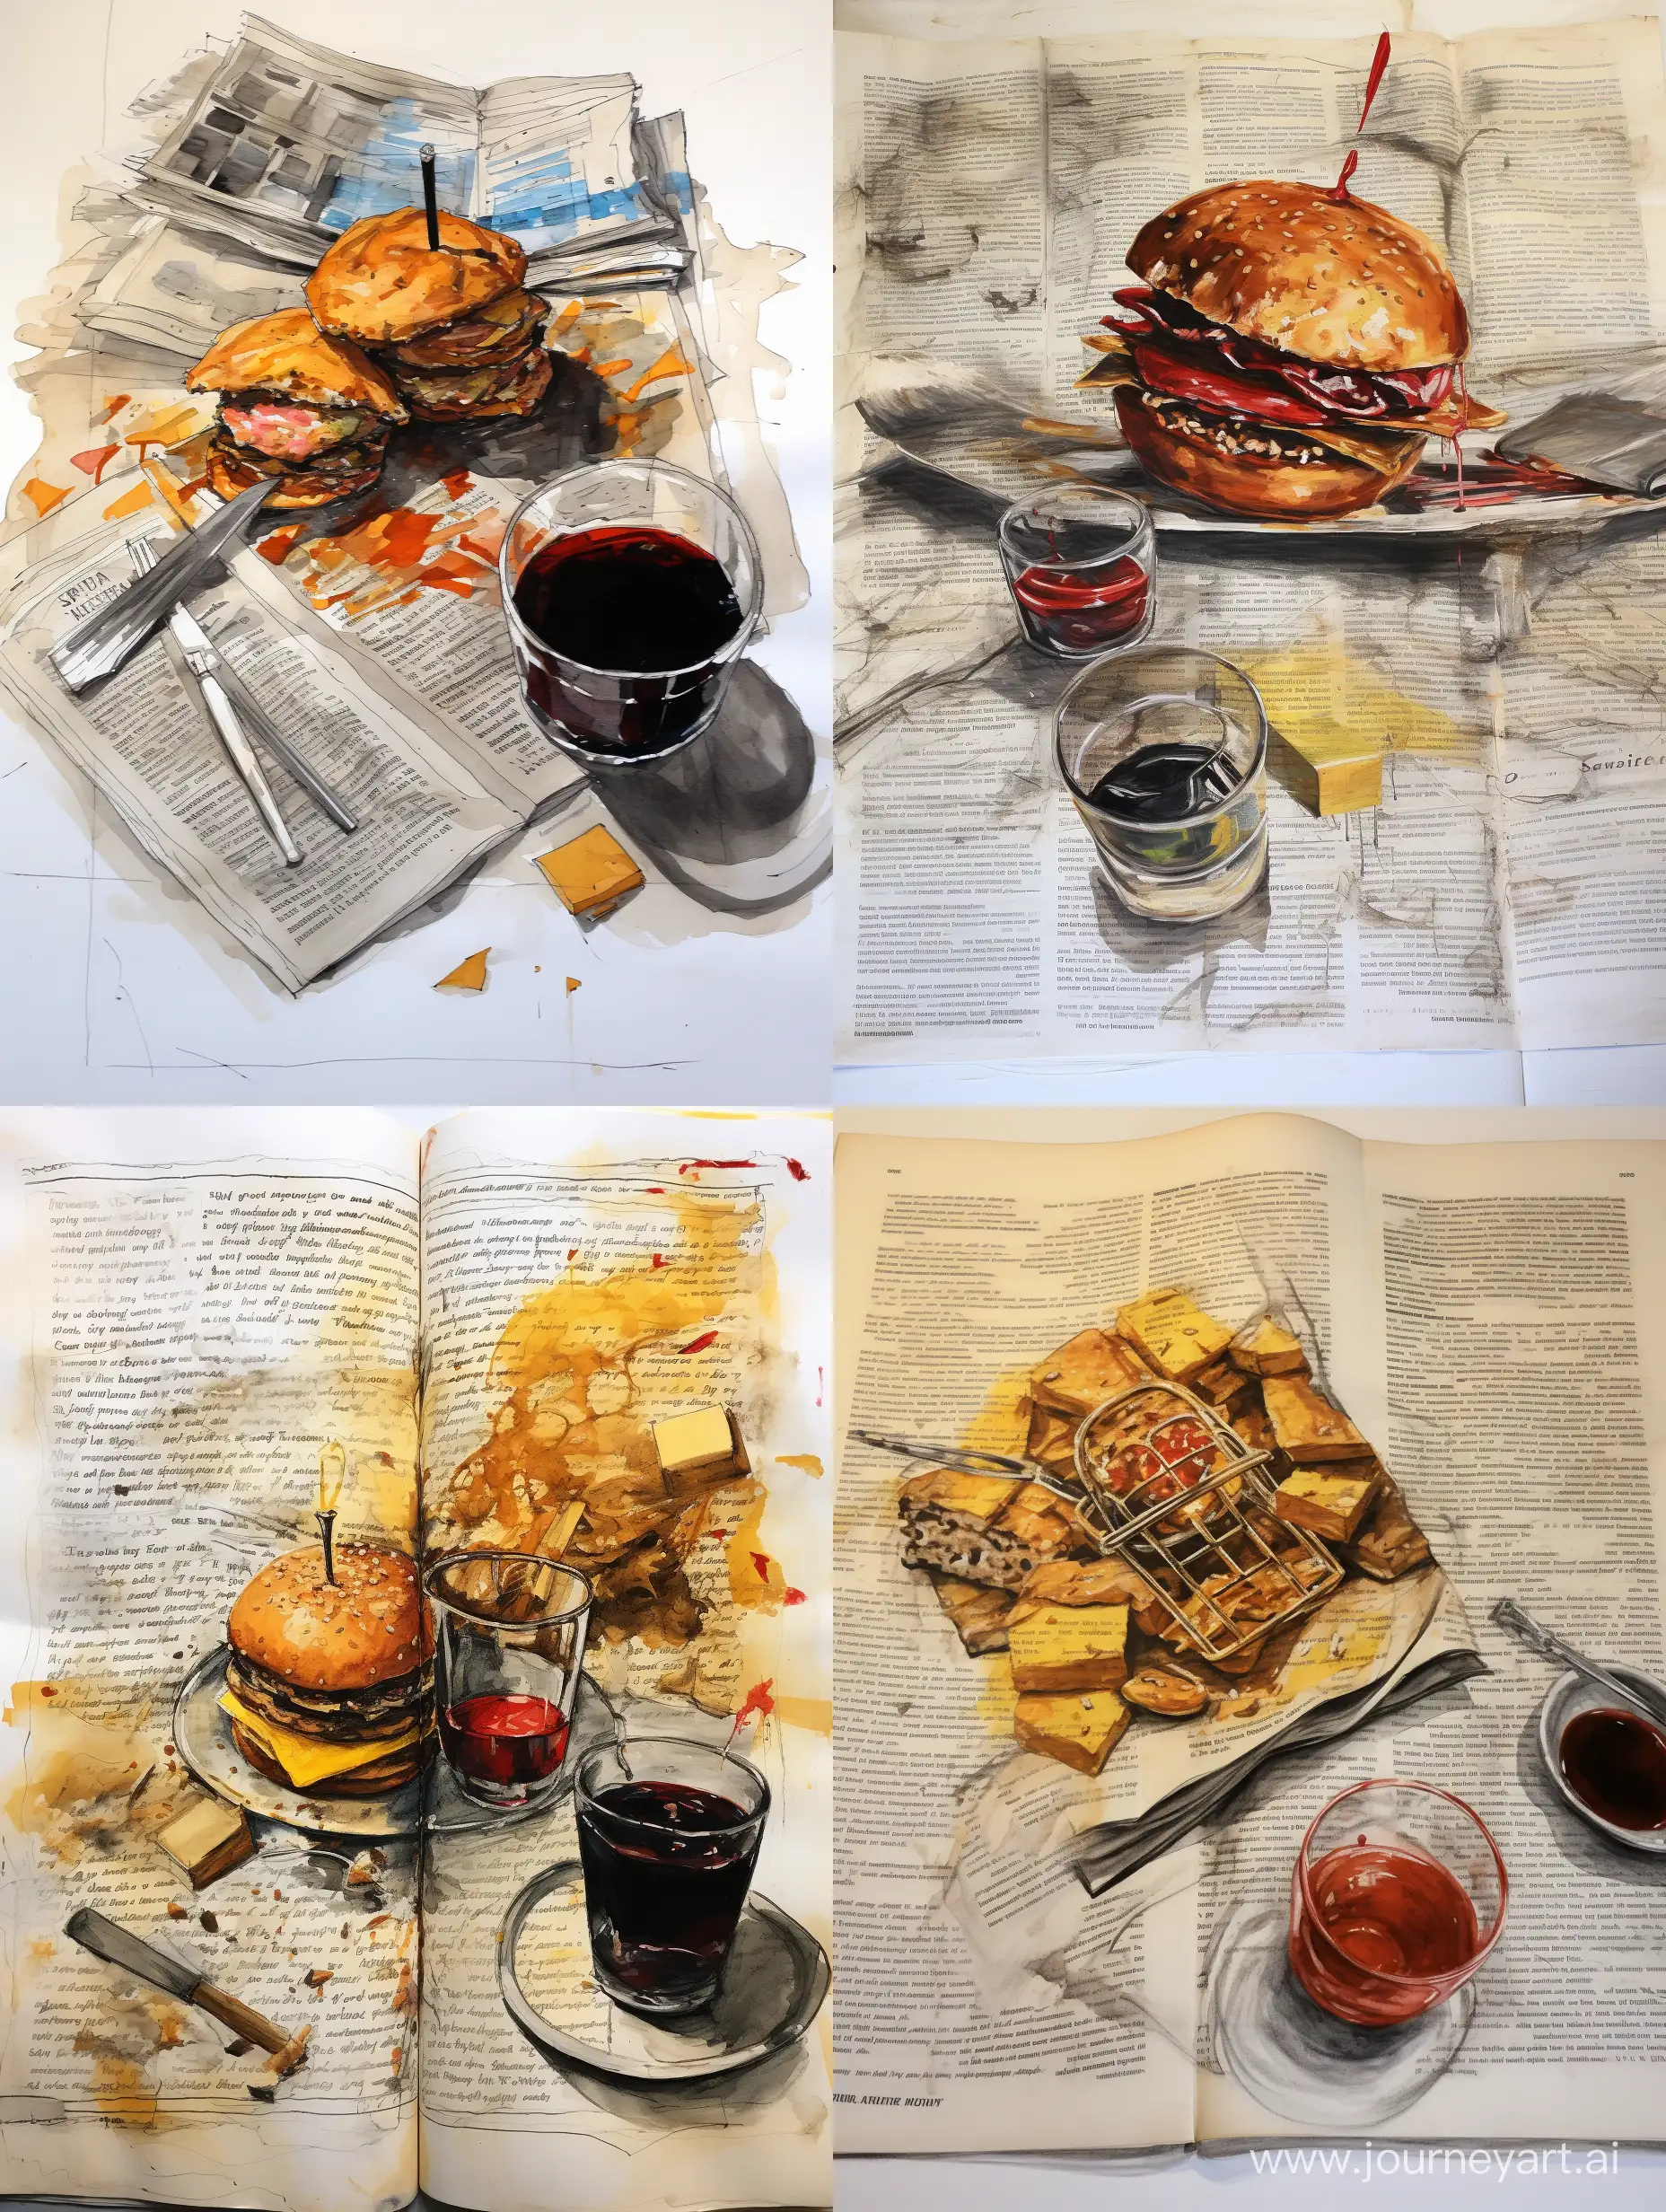 Whiskey-and-Ink-Artistic-Chaos-with-Burgers-and-Manuscript